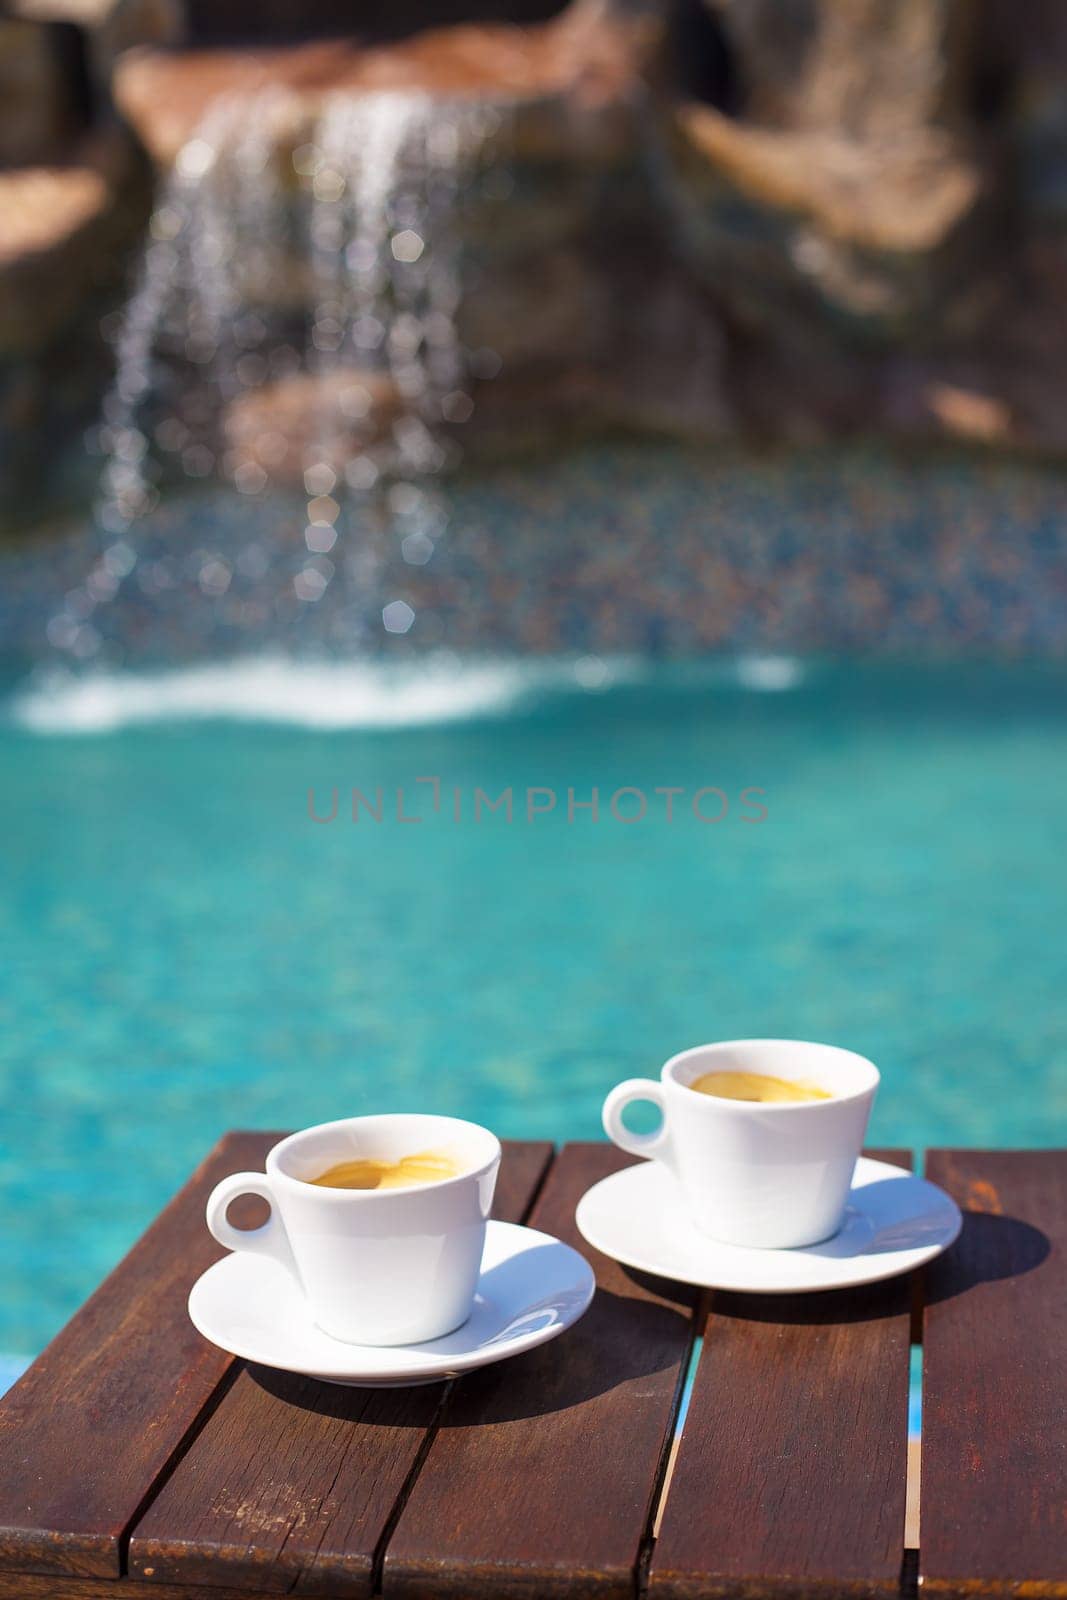 Two cups of coffee on the table near the pool.